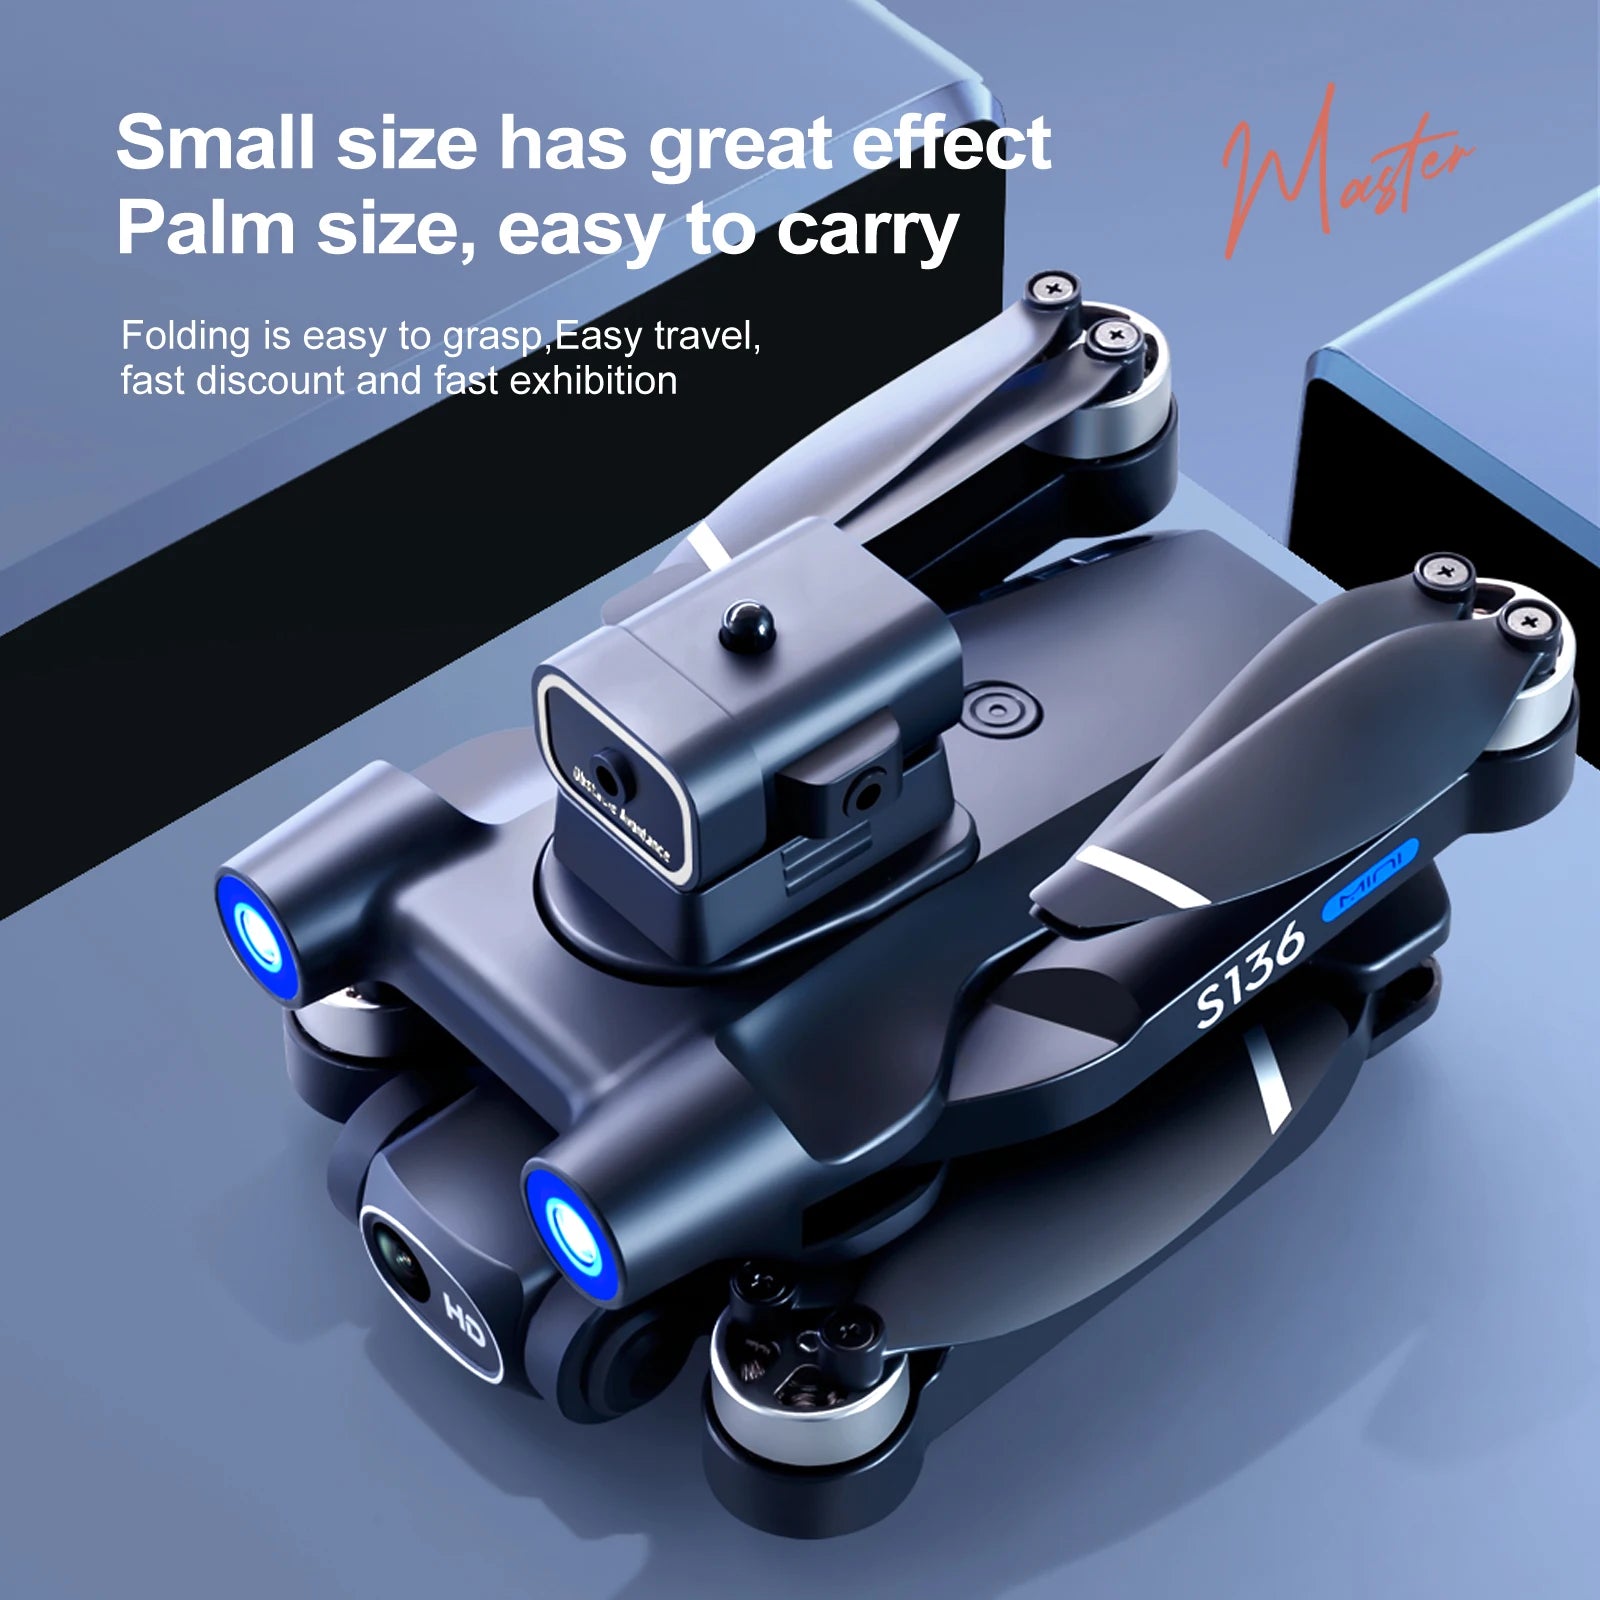 S136 GPS Drone, Small size has great effect Inkedter Palm size, easy to carry Folding is easy to